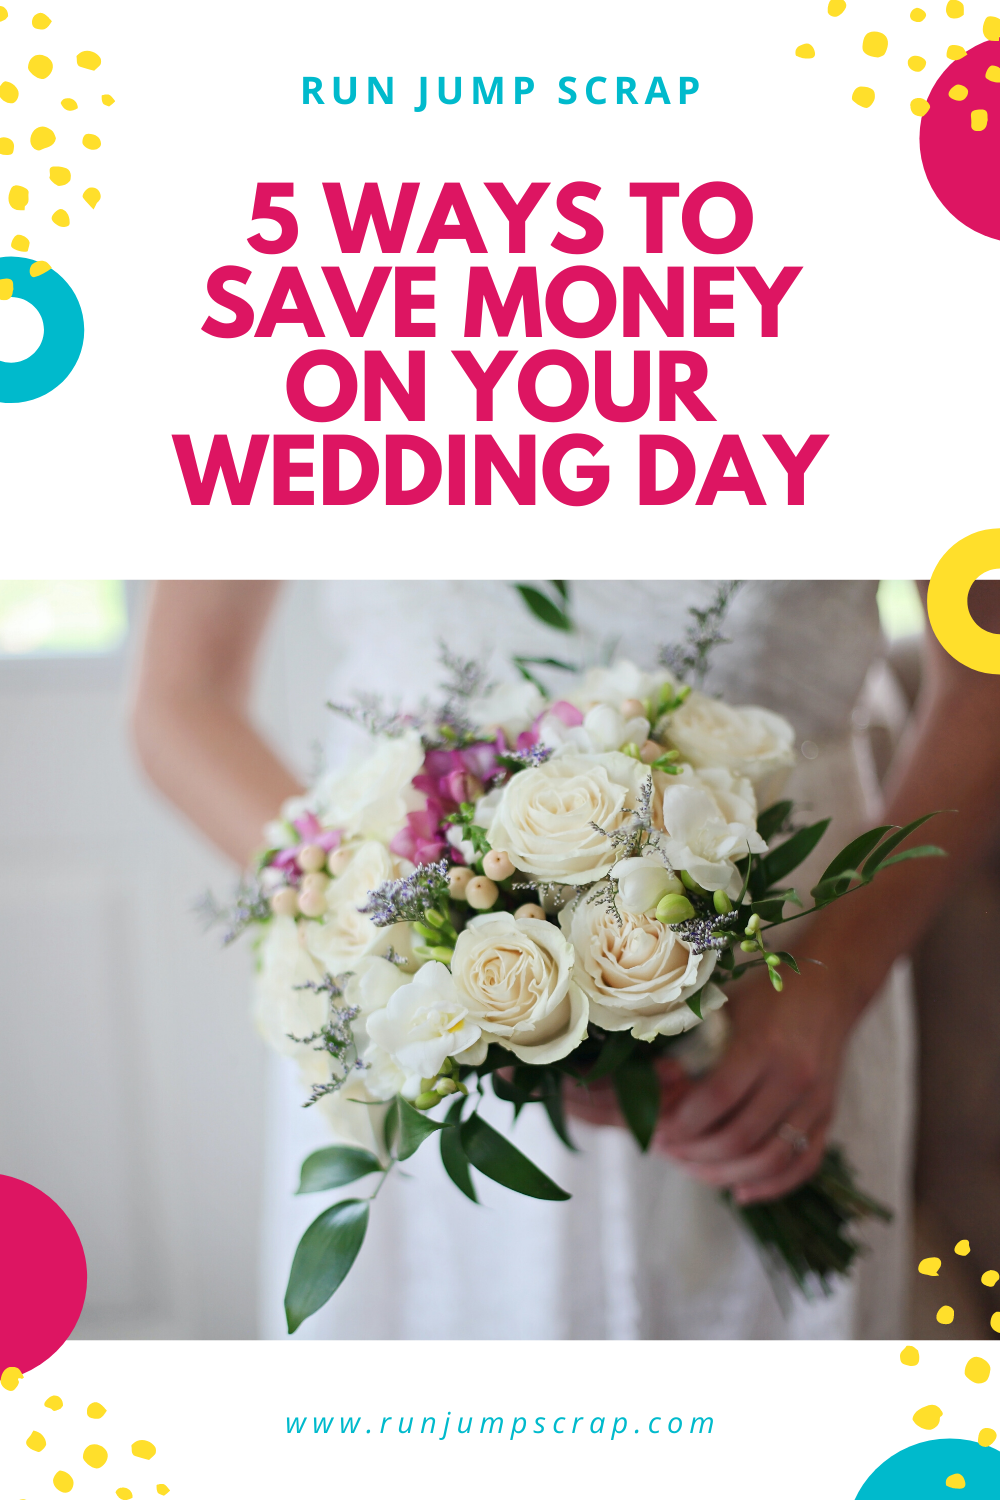 5 ways to save money on your wedding day